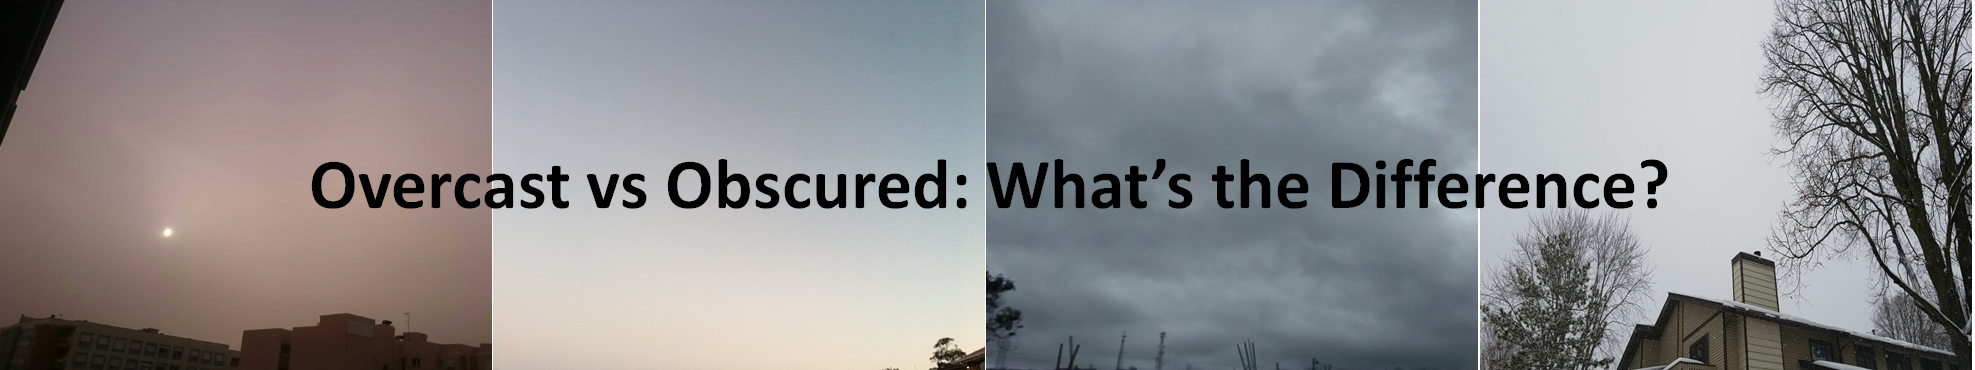 Difference between overcast and obscured. Overcast is 100% clouds, obscured is something blocking the view of the sky.